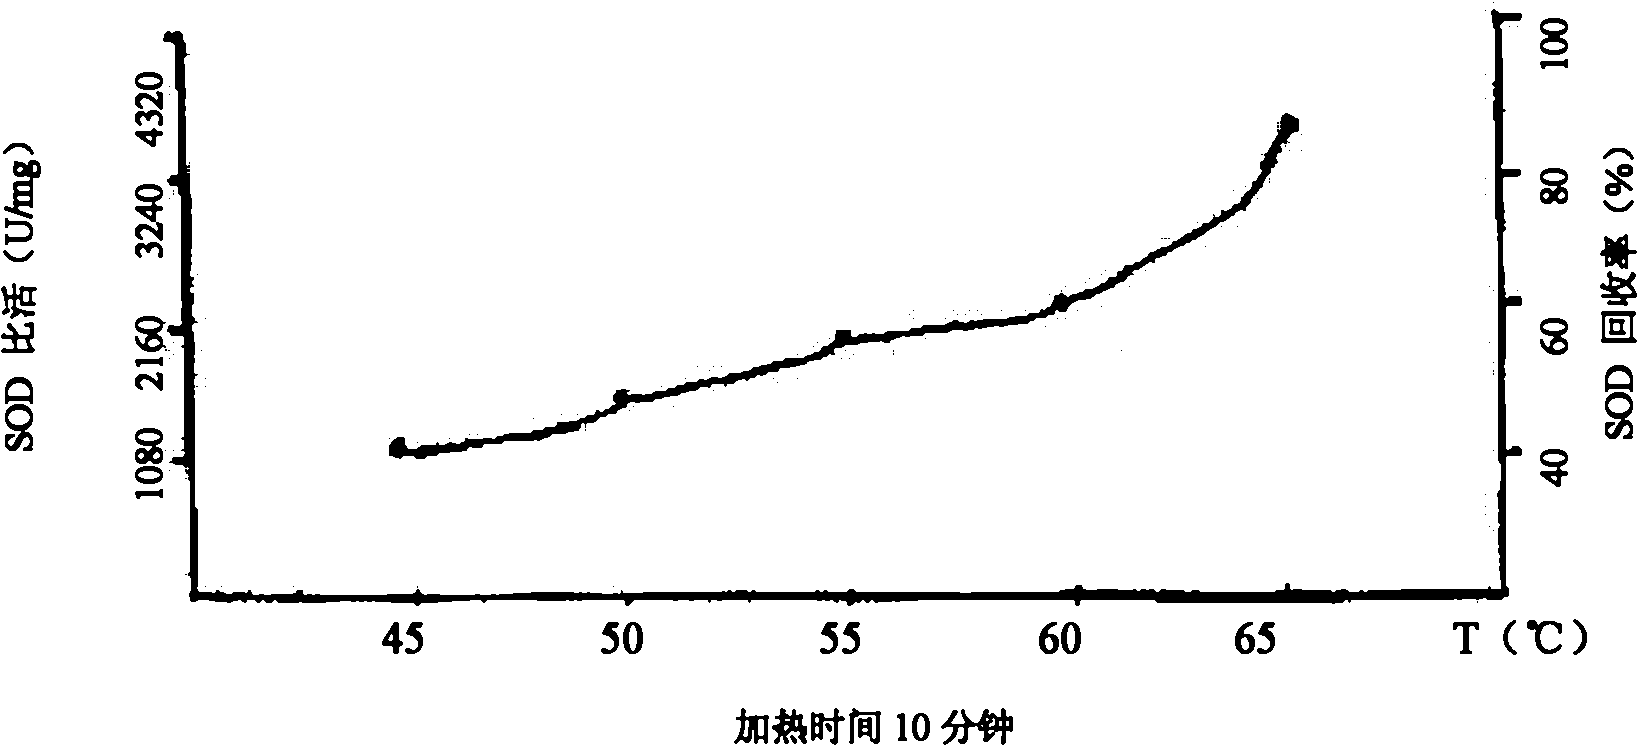 Method for extracting superoxide dismutase from cattle and sheep blood largly industrially and blade type agitator applied to same